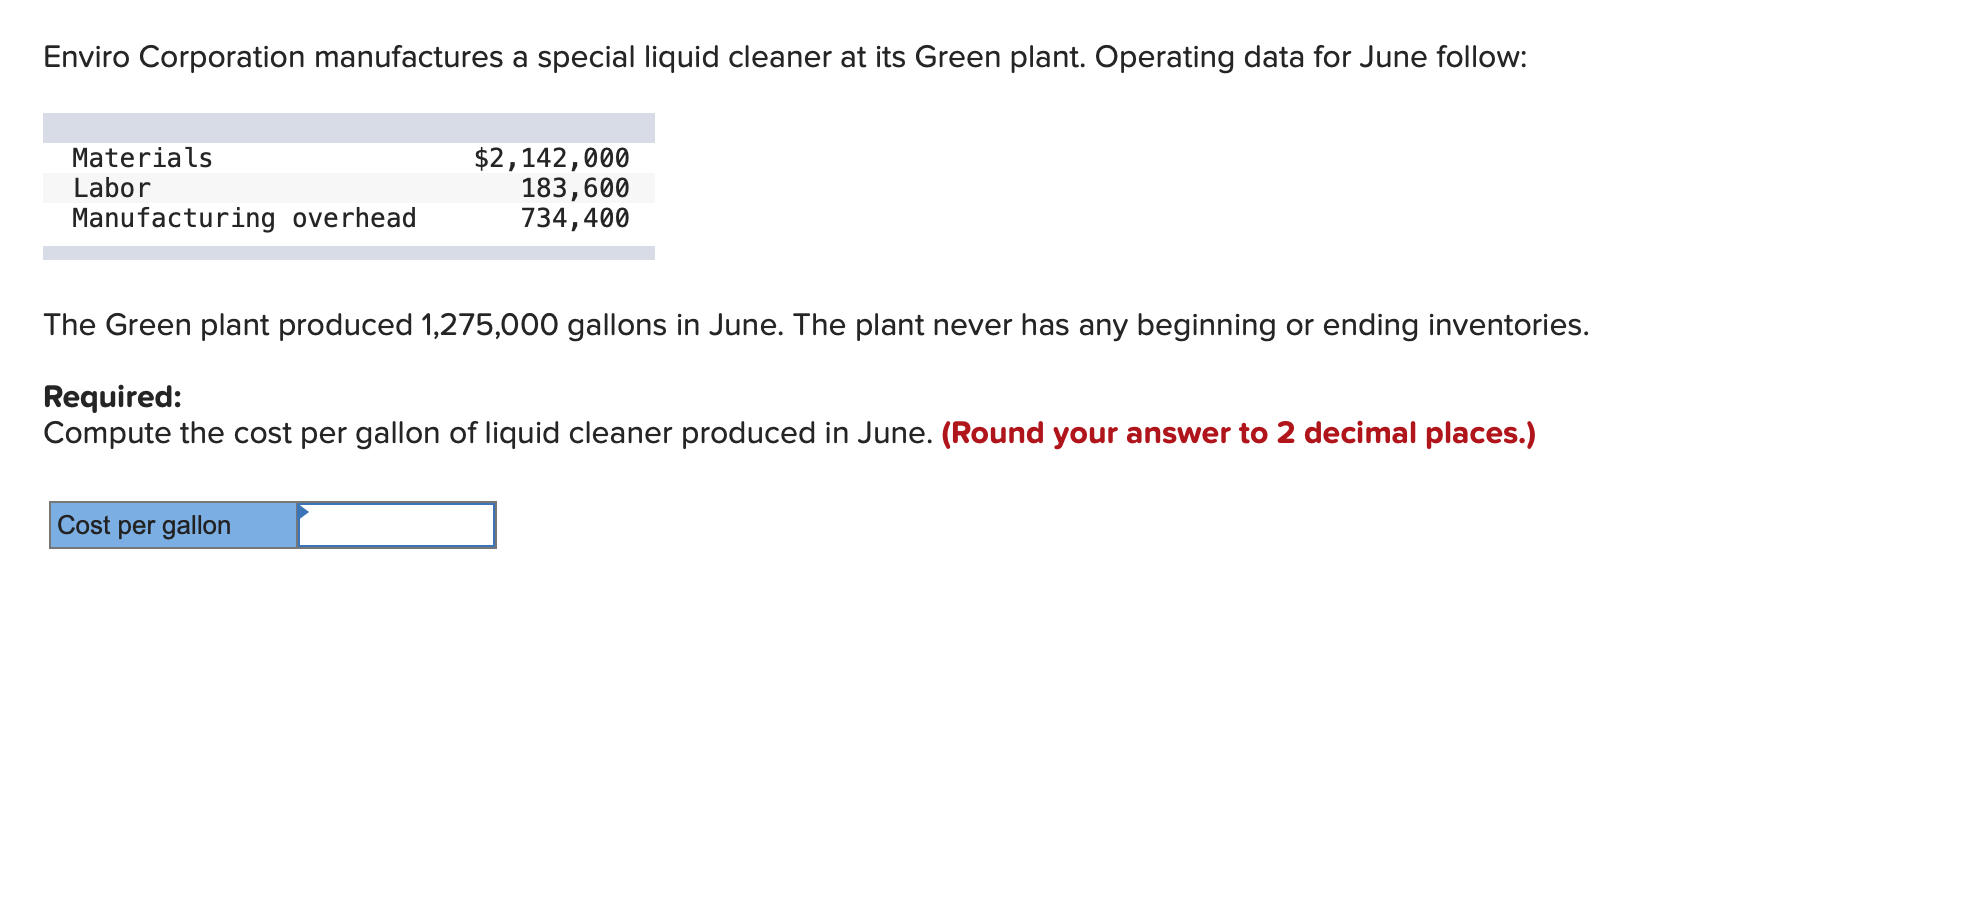 Enviro Corporation manufactures a special liquid cleaner at its Green plant. Operating data for June follow:
Materials
Labor
$2,142,000
183,600
734,400
Manufacturing overhead
The Green plant produced 1,275,000 gallons in June. The plant never has any beginning or ending inventories.
Required:
Compute the cost per gallon of liquid cleaner produced in June. (Round your answer to 2 decimal places.)
Cost per gallon
